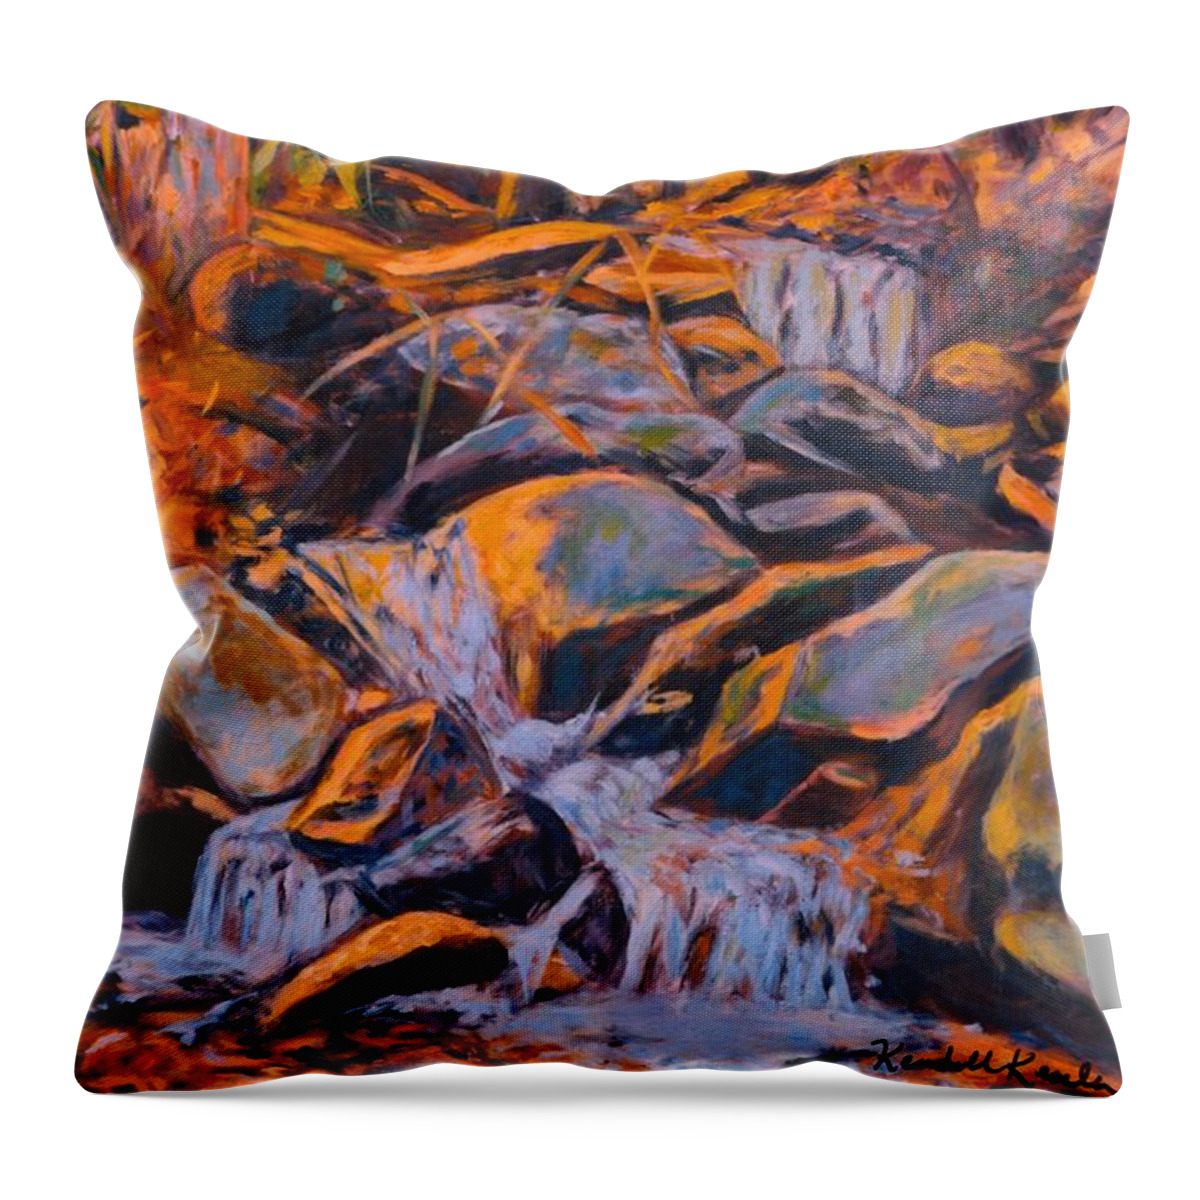 Rocks Throw Pillow featuring the painting Morning Light by Kendall Kessler